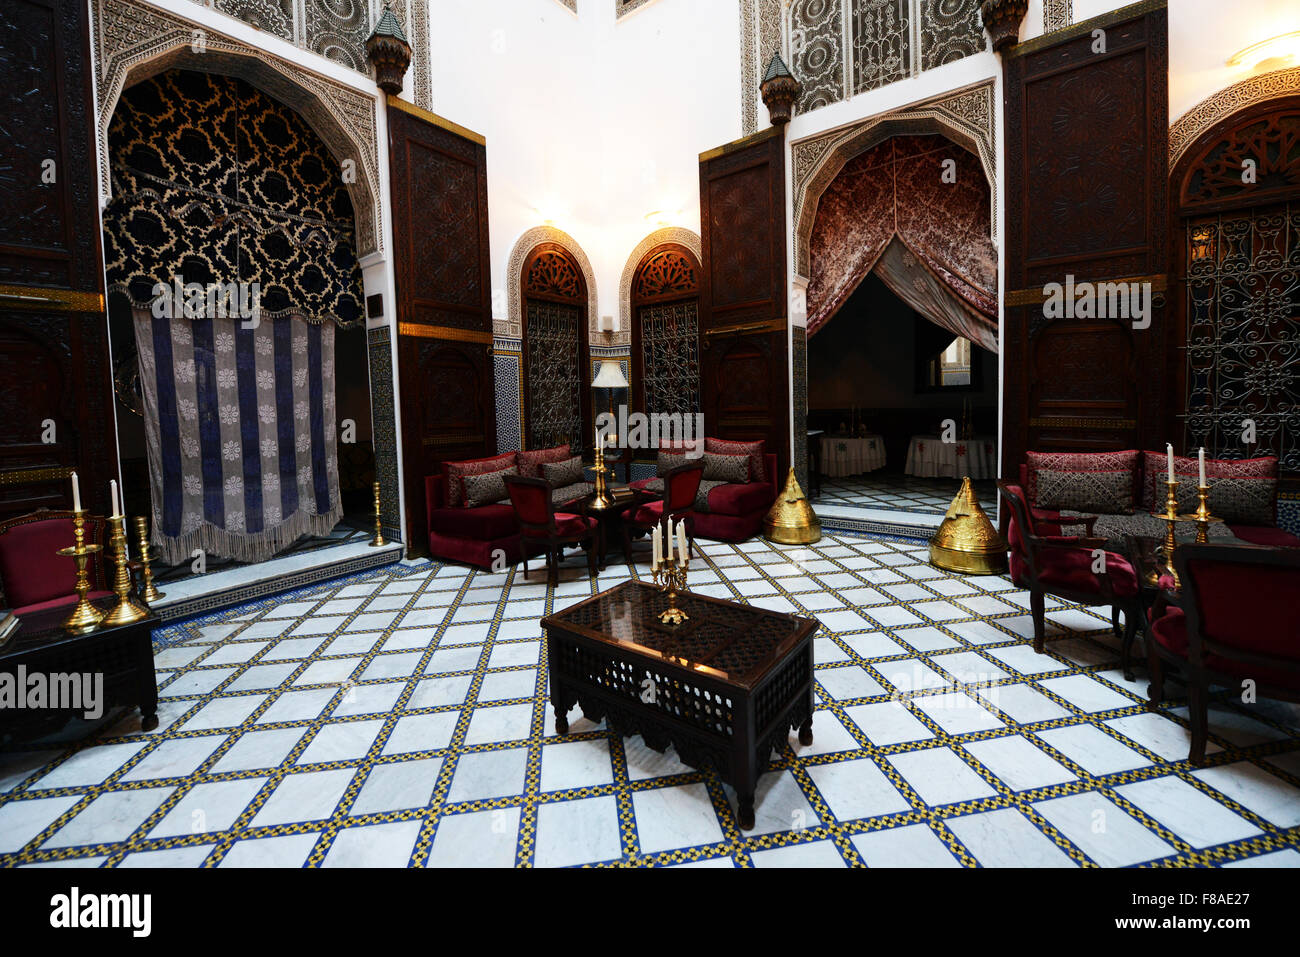 The beautiful traditional hotel ( Riad )- La Maison Bleue in Fes. Stock Photo